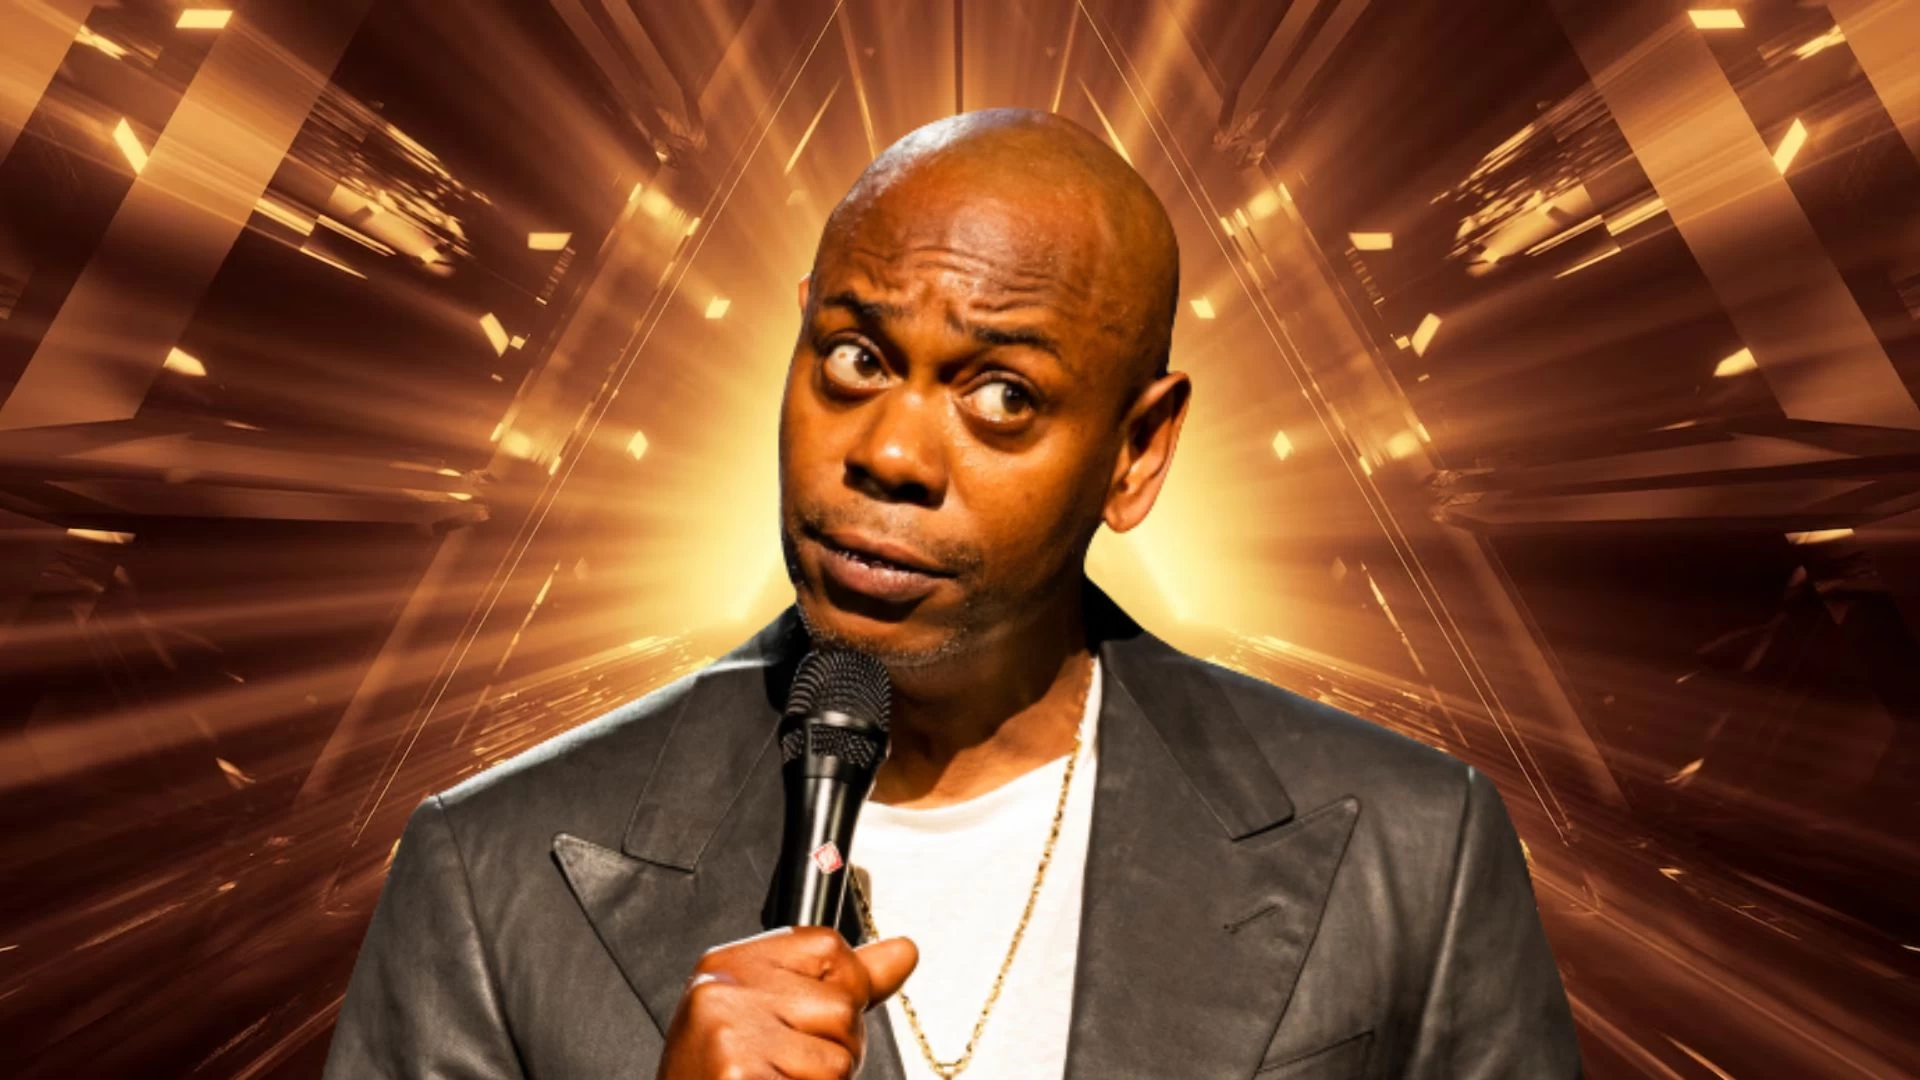 Dave Chappelle Presale Code 2023, How to Get Dave Chappelle Presale Code 2023?